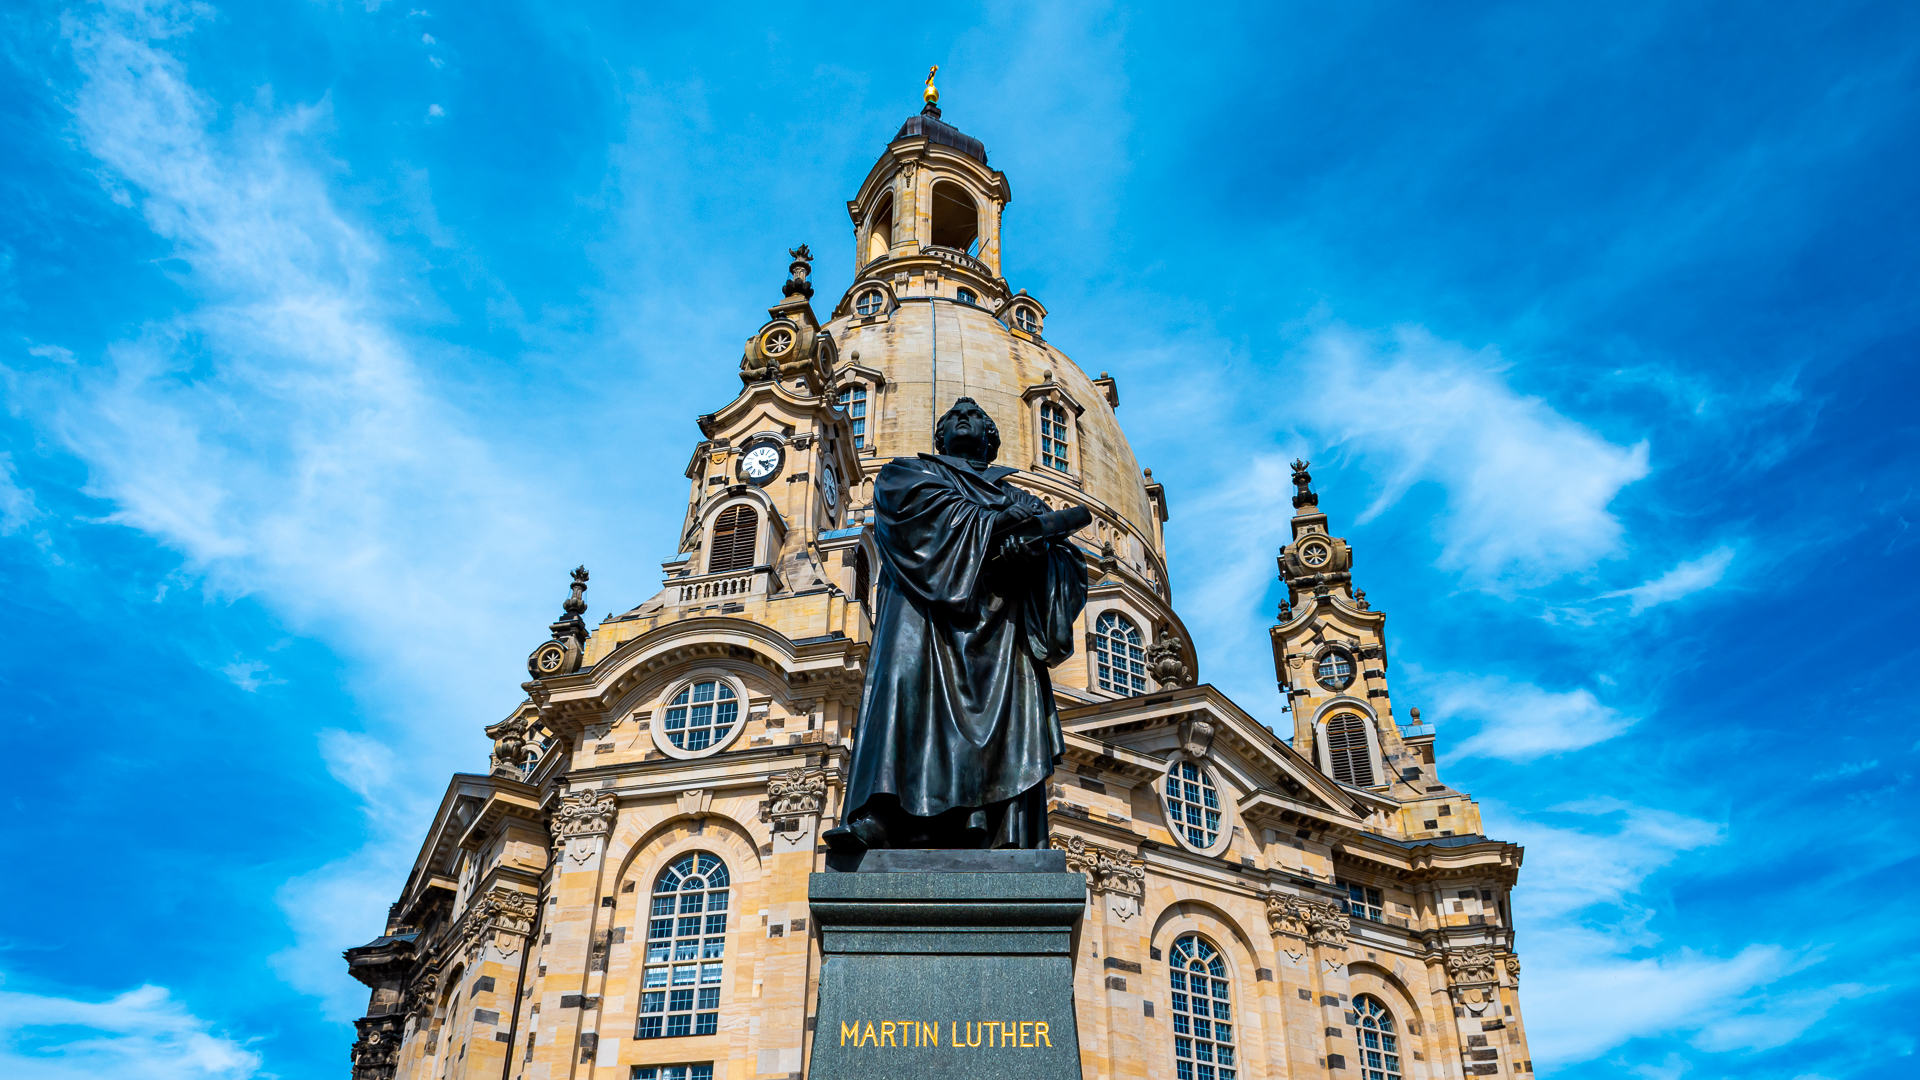 Statue of Martin Luther and the Frauenkirche